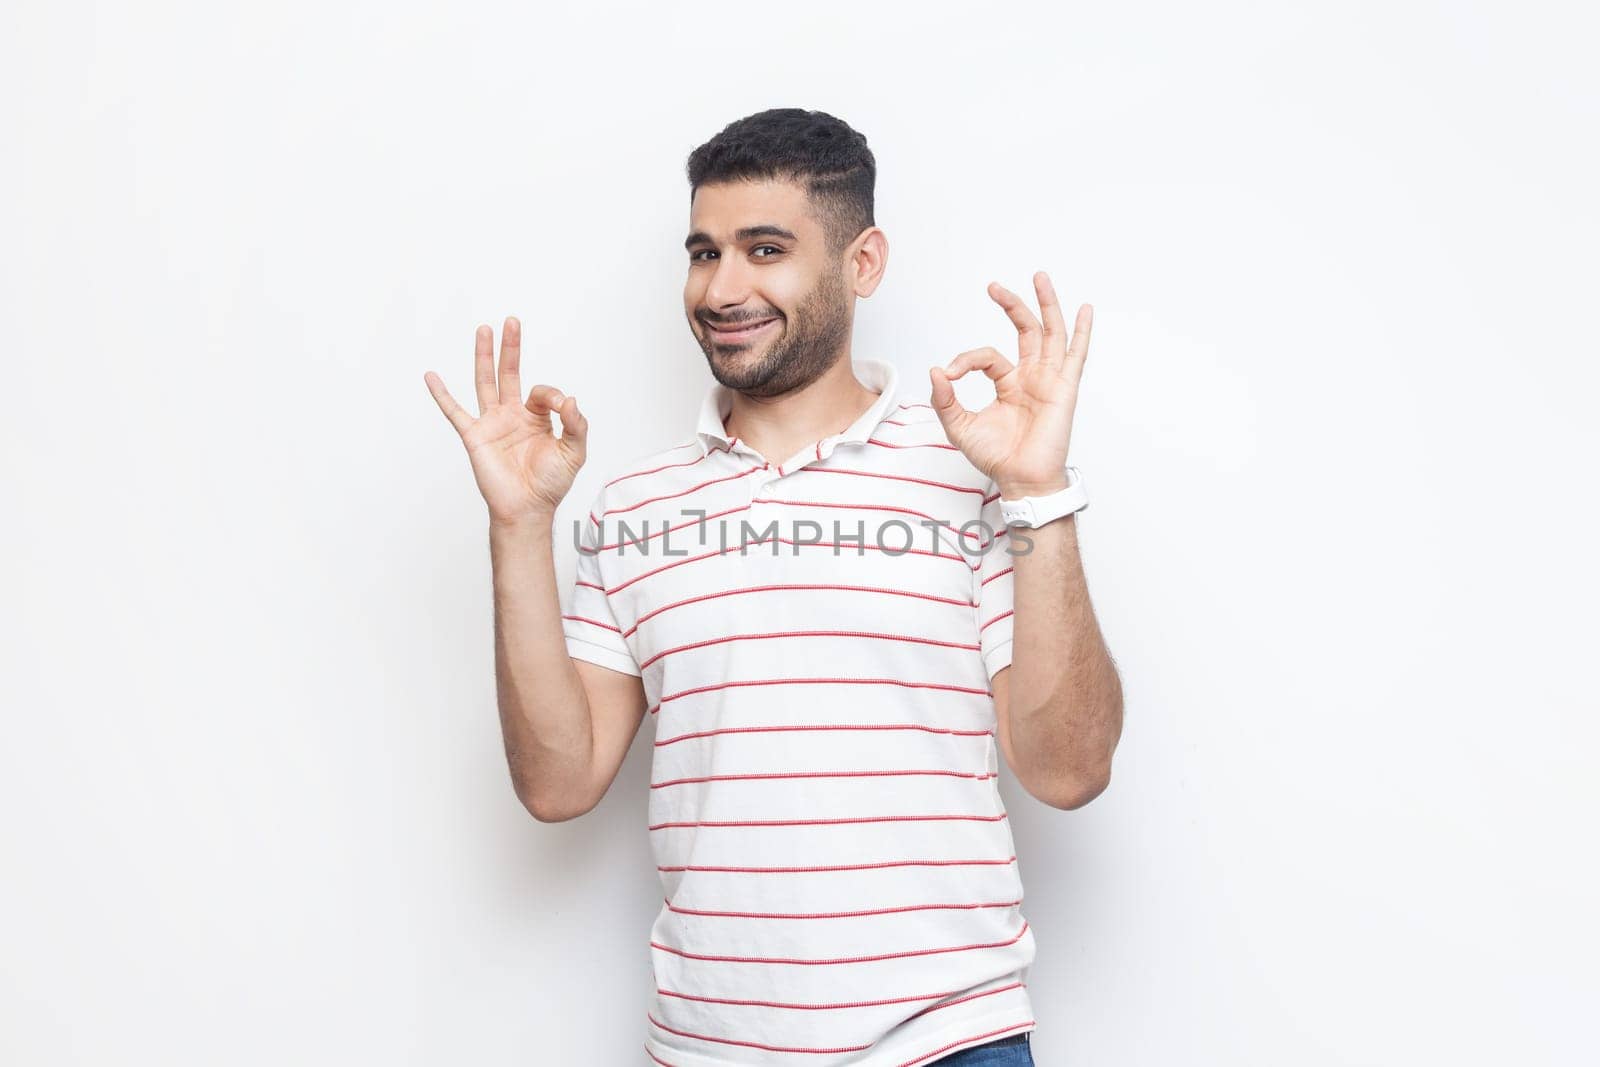 Everything ok. Portrait of attractive positive smiling bearded man wearing striped t-shirt standing showing okay gesture, agreed. Indoor studio shot isolated on gray background.